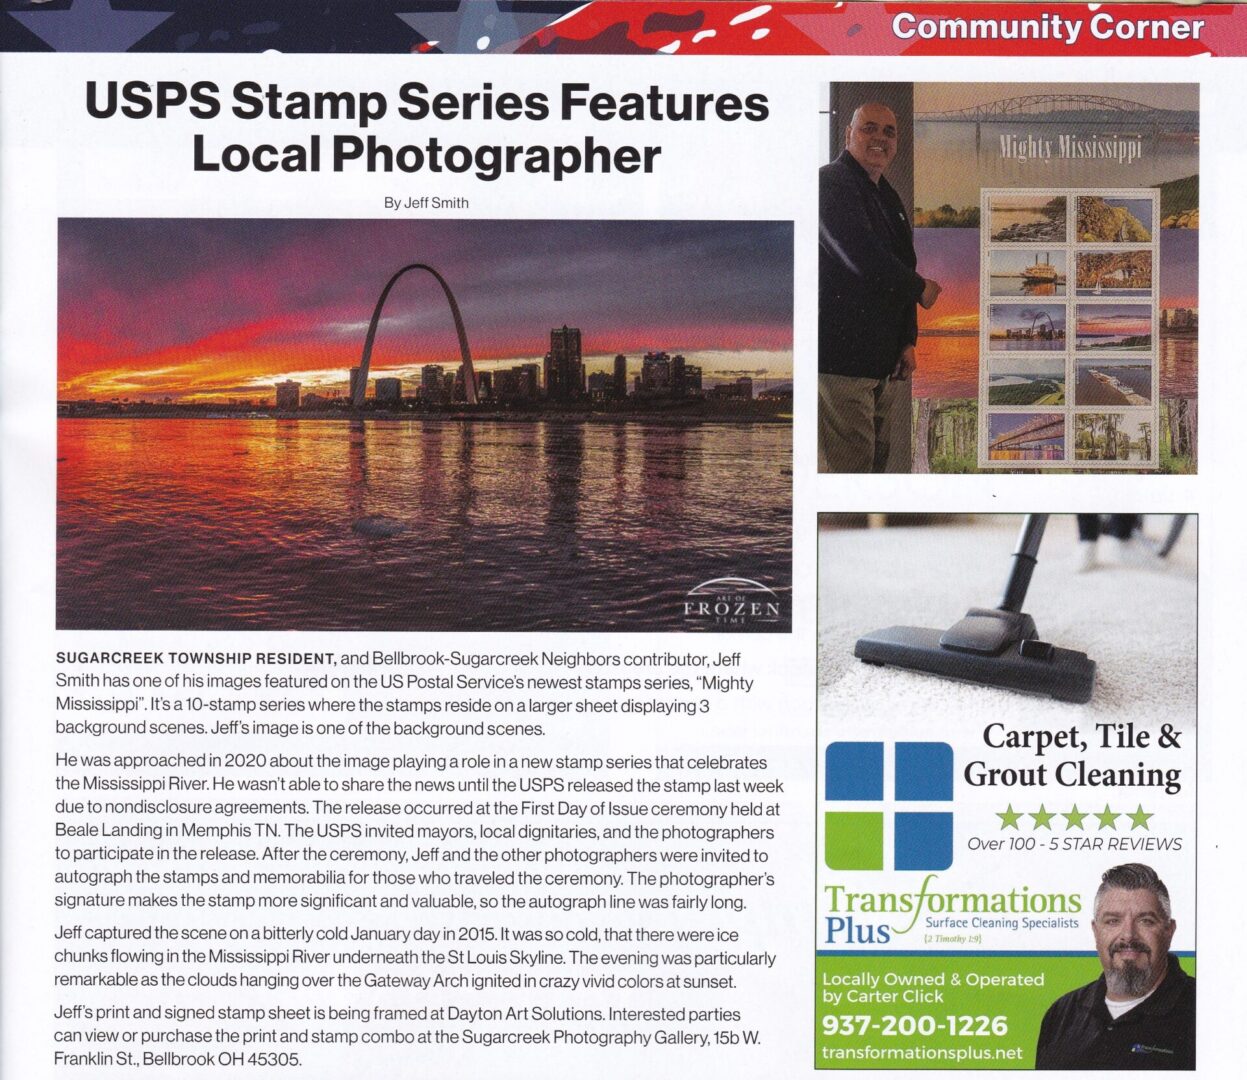 A magazine article covering how the US Postal Service selected one of my St Louis images for their Mighty Mississippi Stamp Series